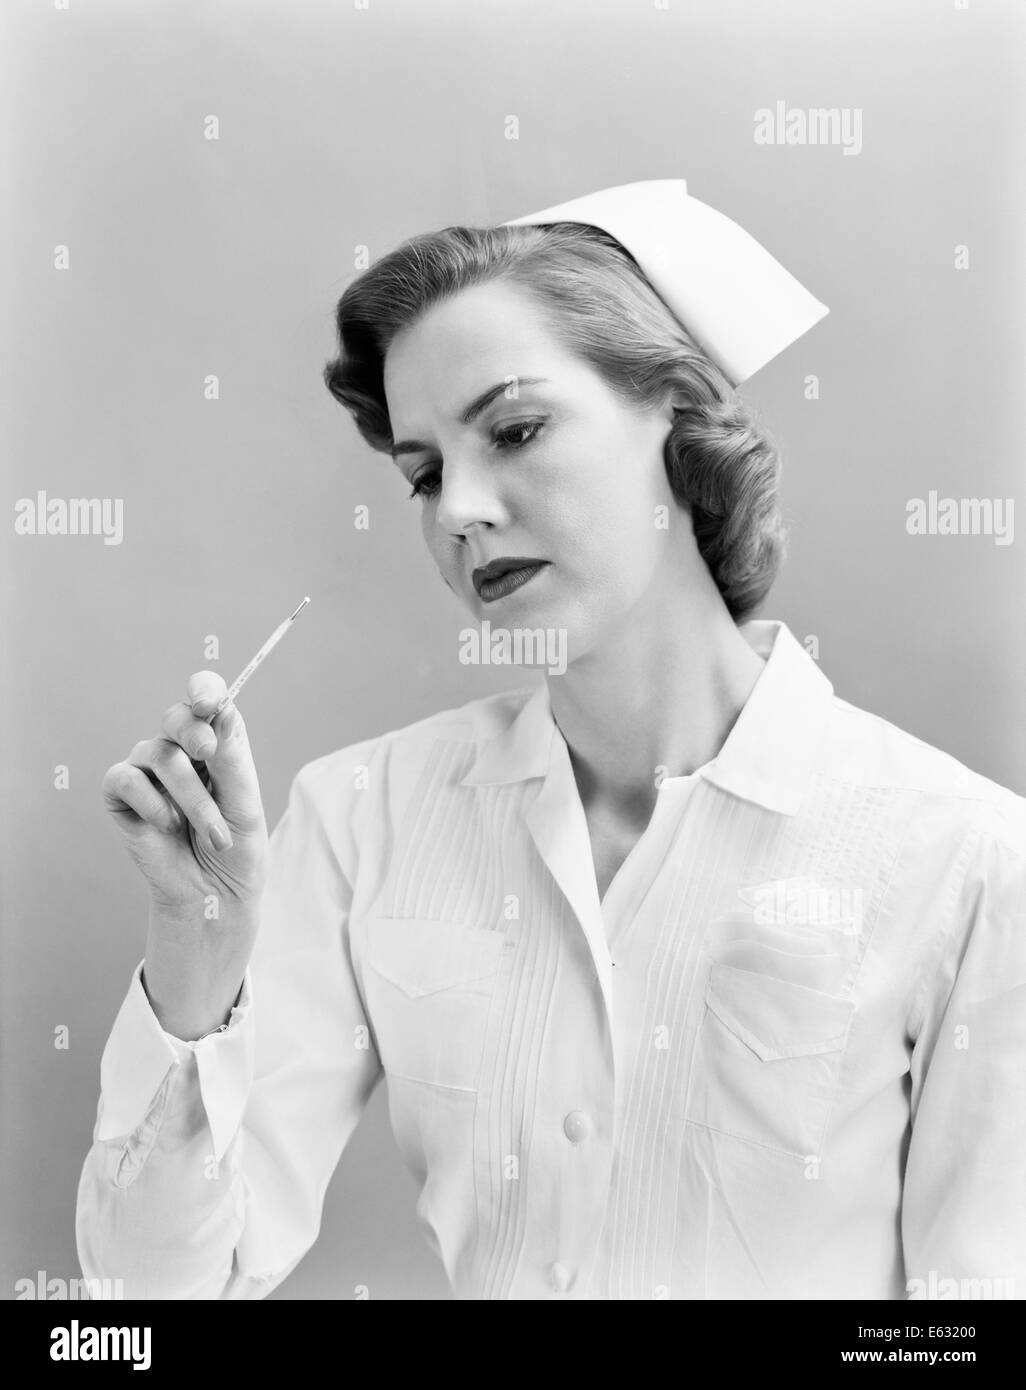 1950s WOMAN NURSE CHECKING TEMPERATURE ON THERMOMETER Stock Photo